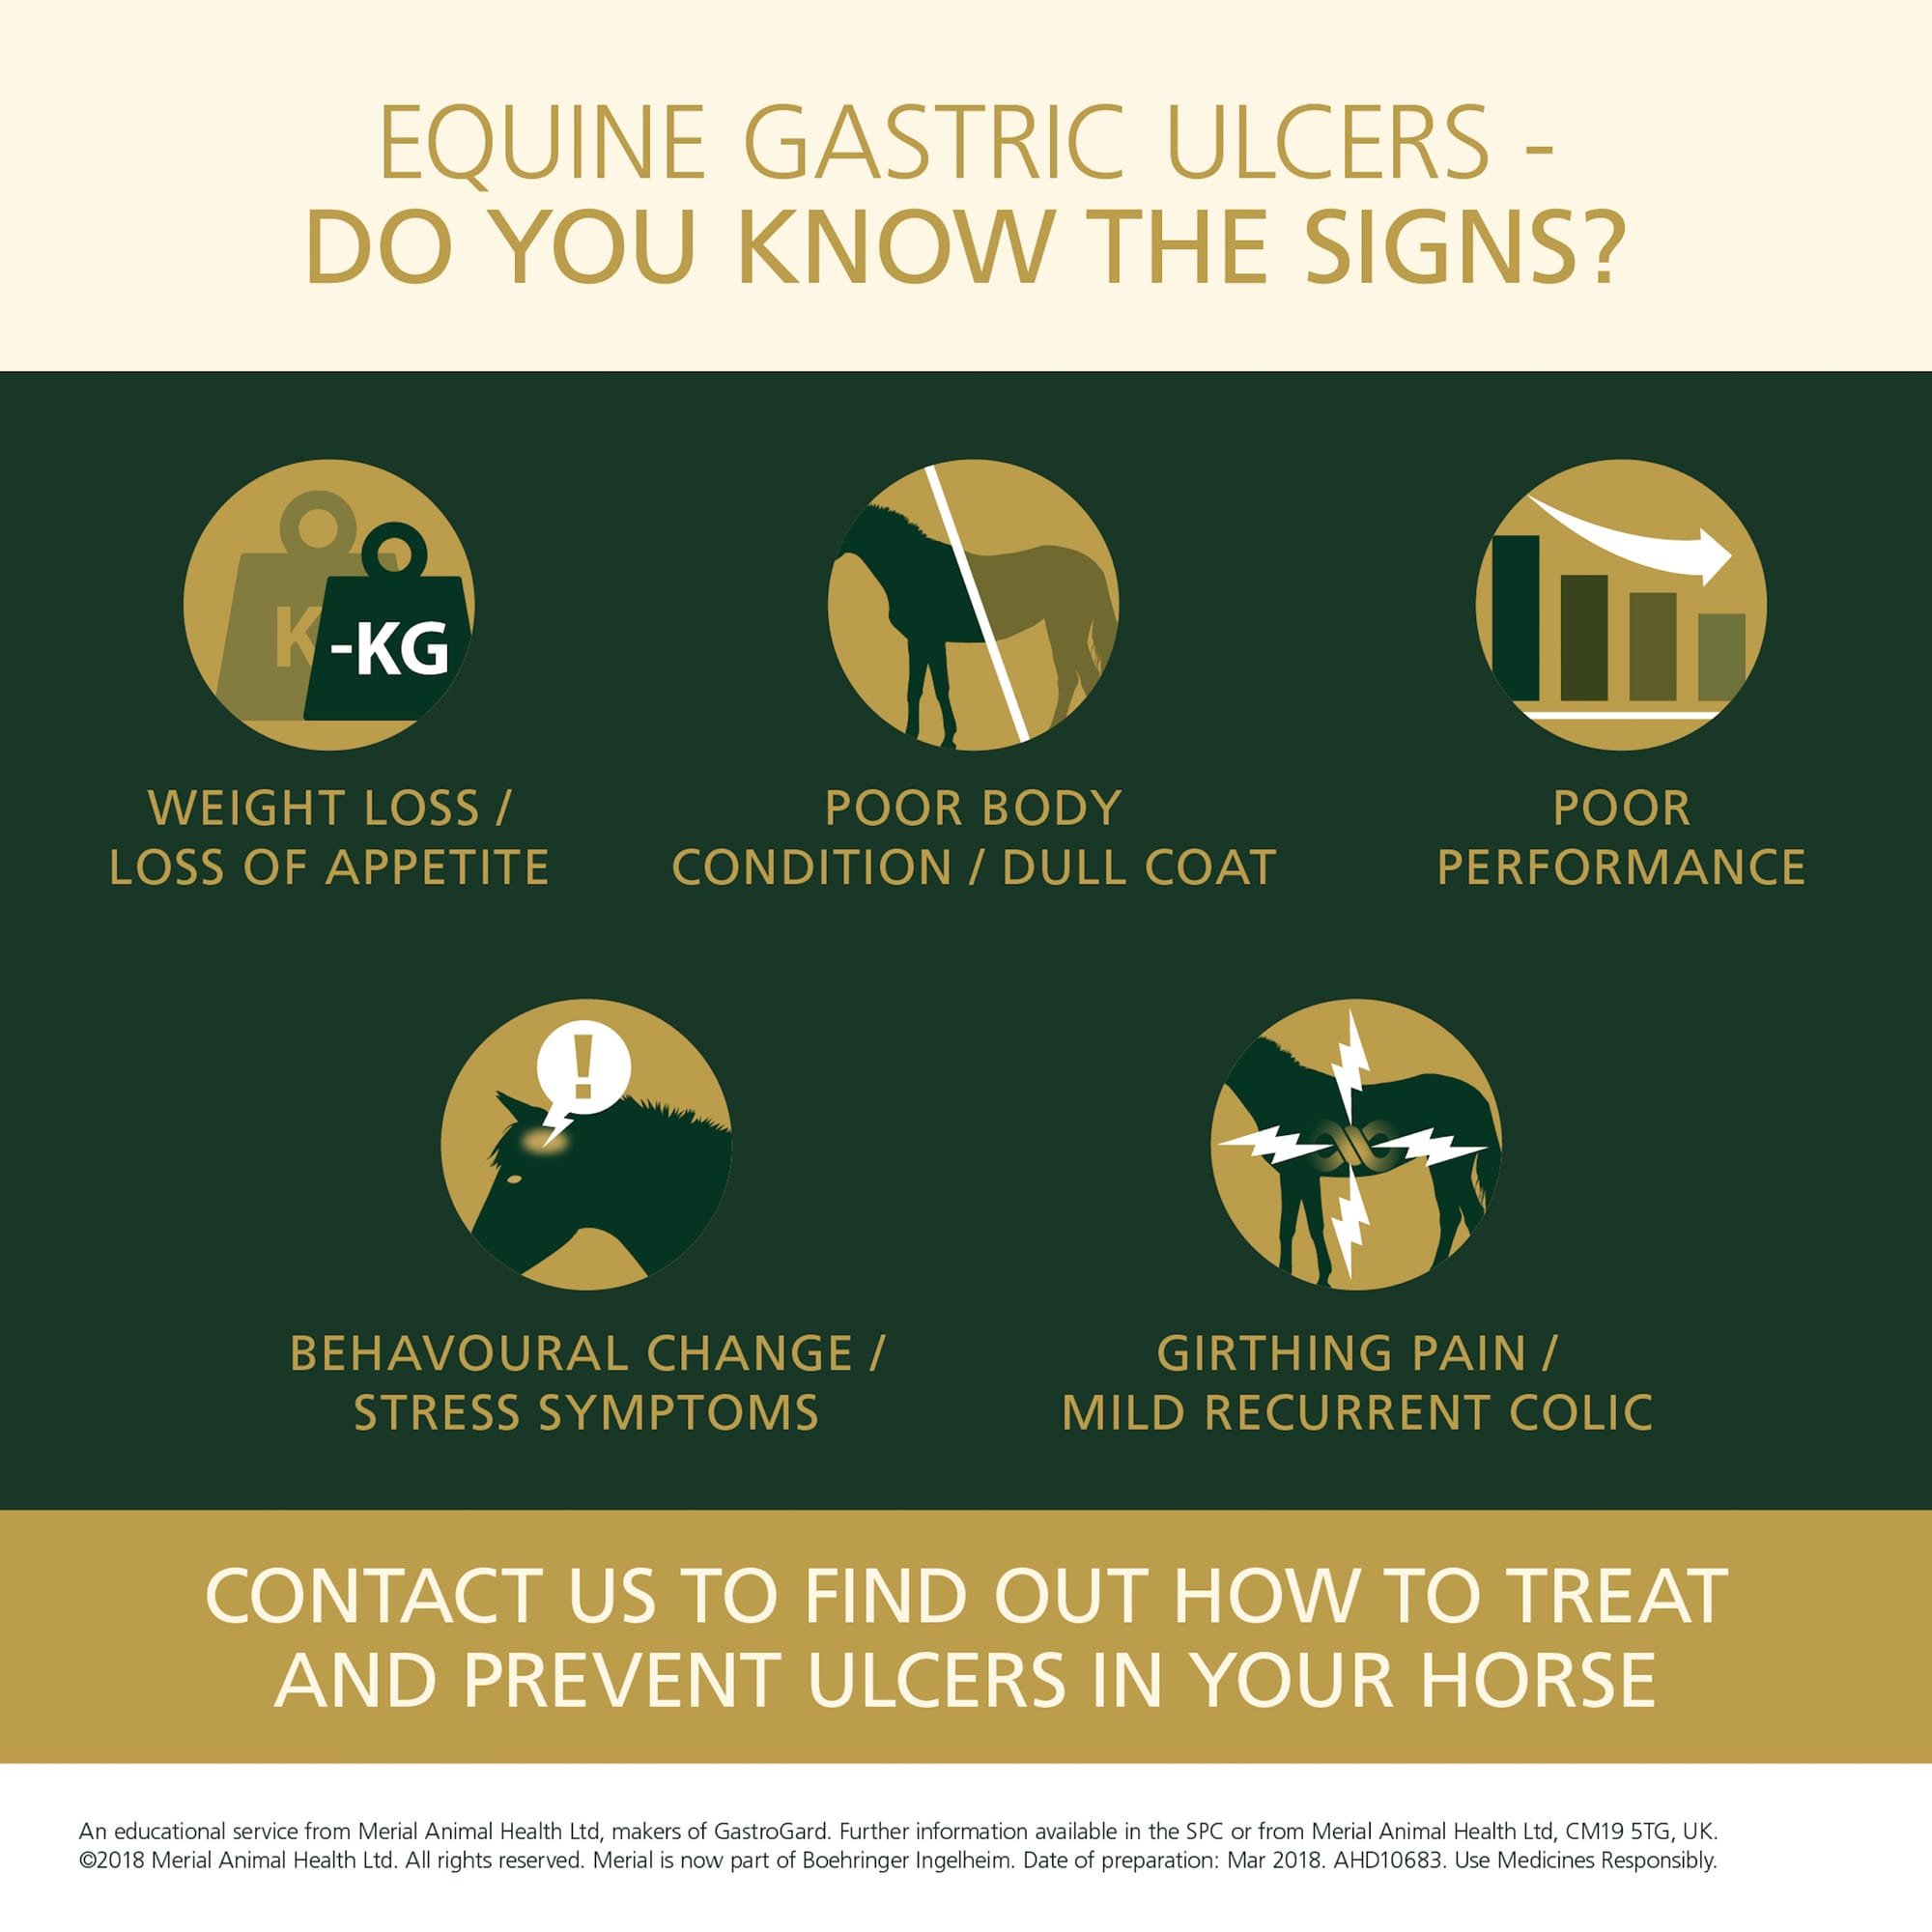 Equine Gastric Ulcers